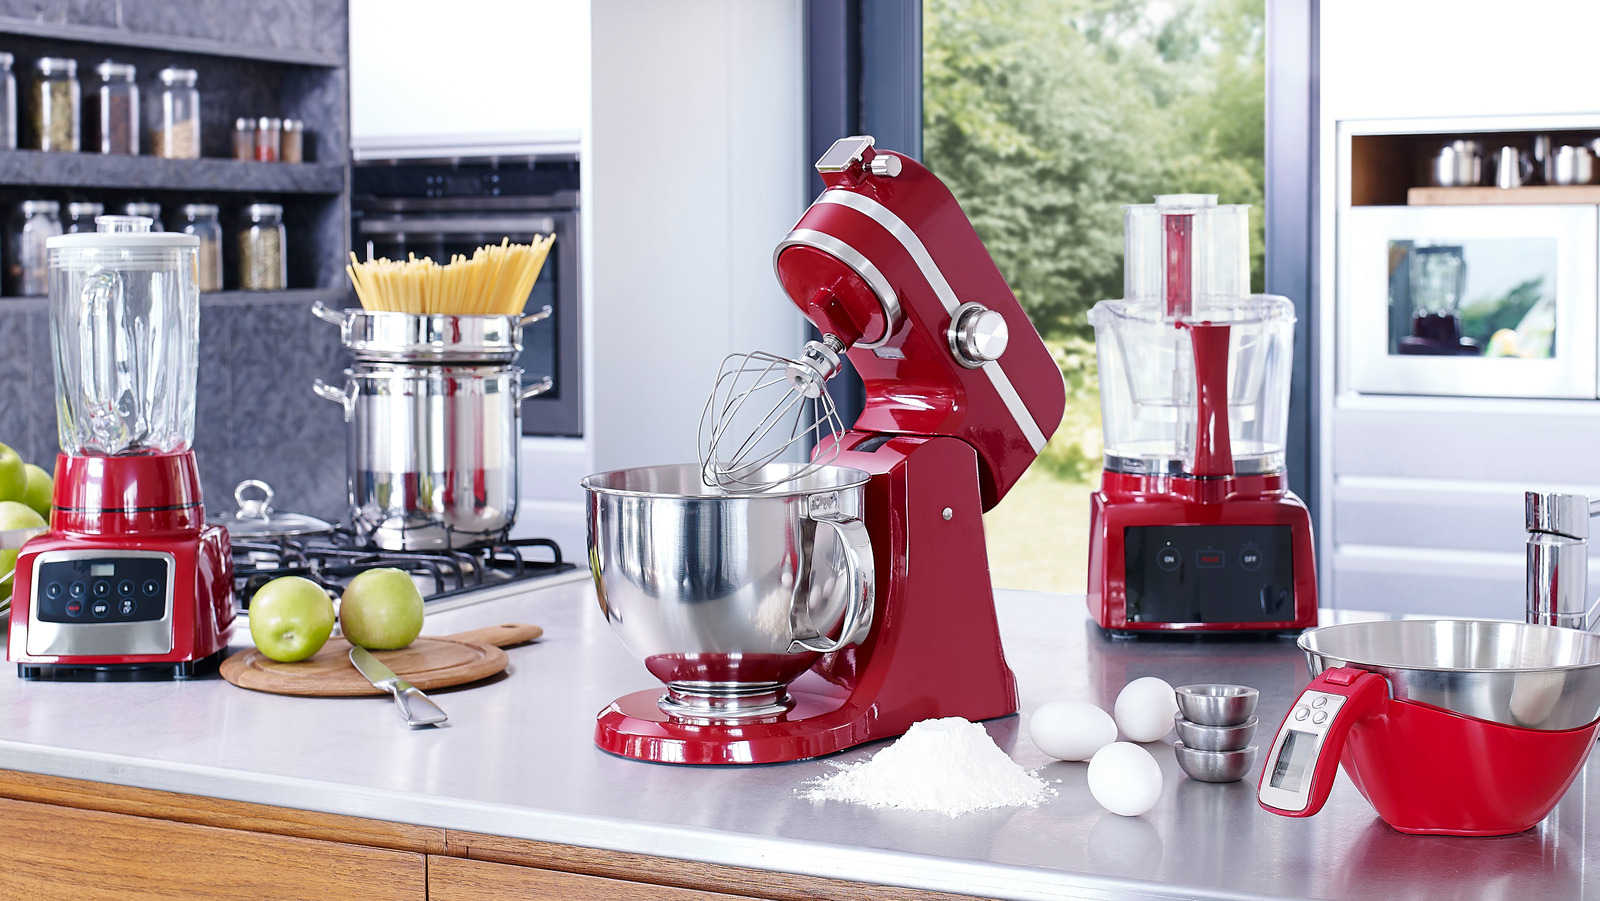 Food Processor vs. Blender: What's the Difference? - PureWow